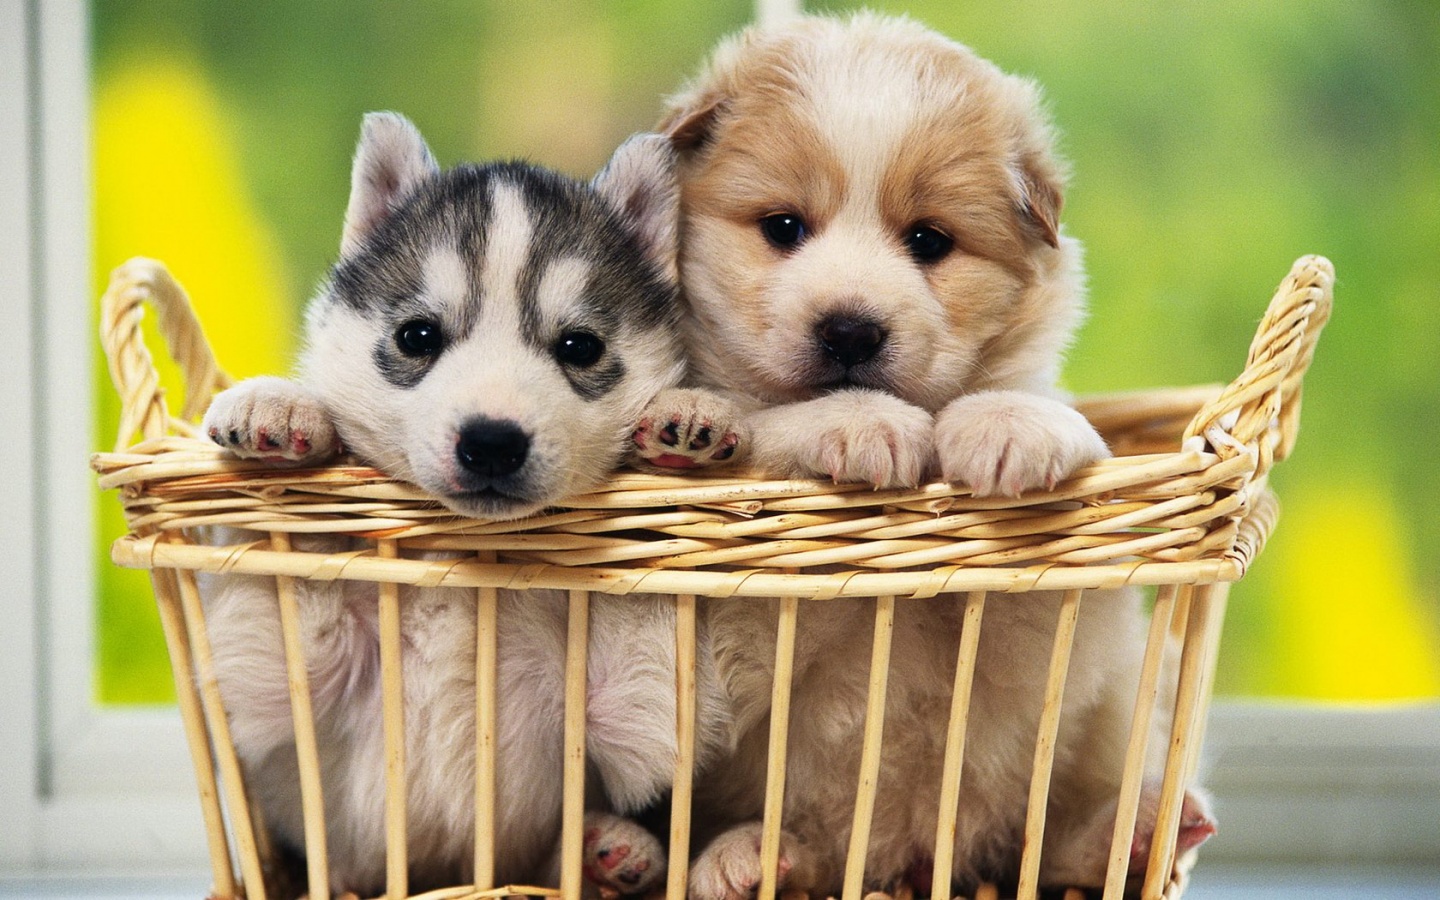  Cute Dogs Wallpapers Download Cute Dogs Wallpapers for Desktop 1440x900